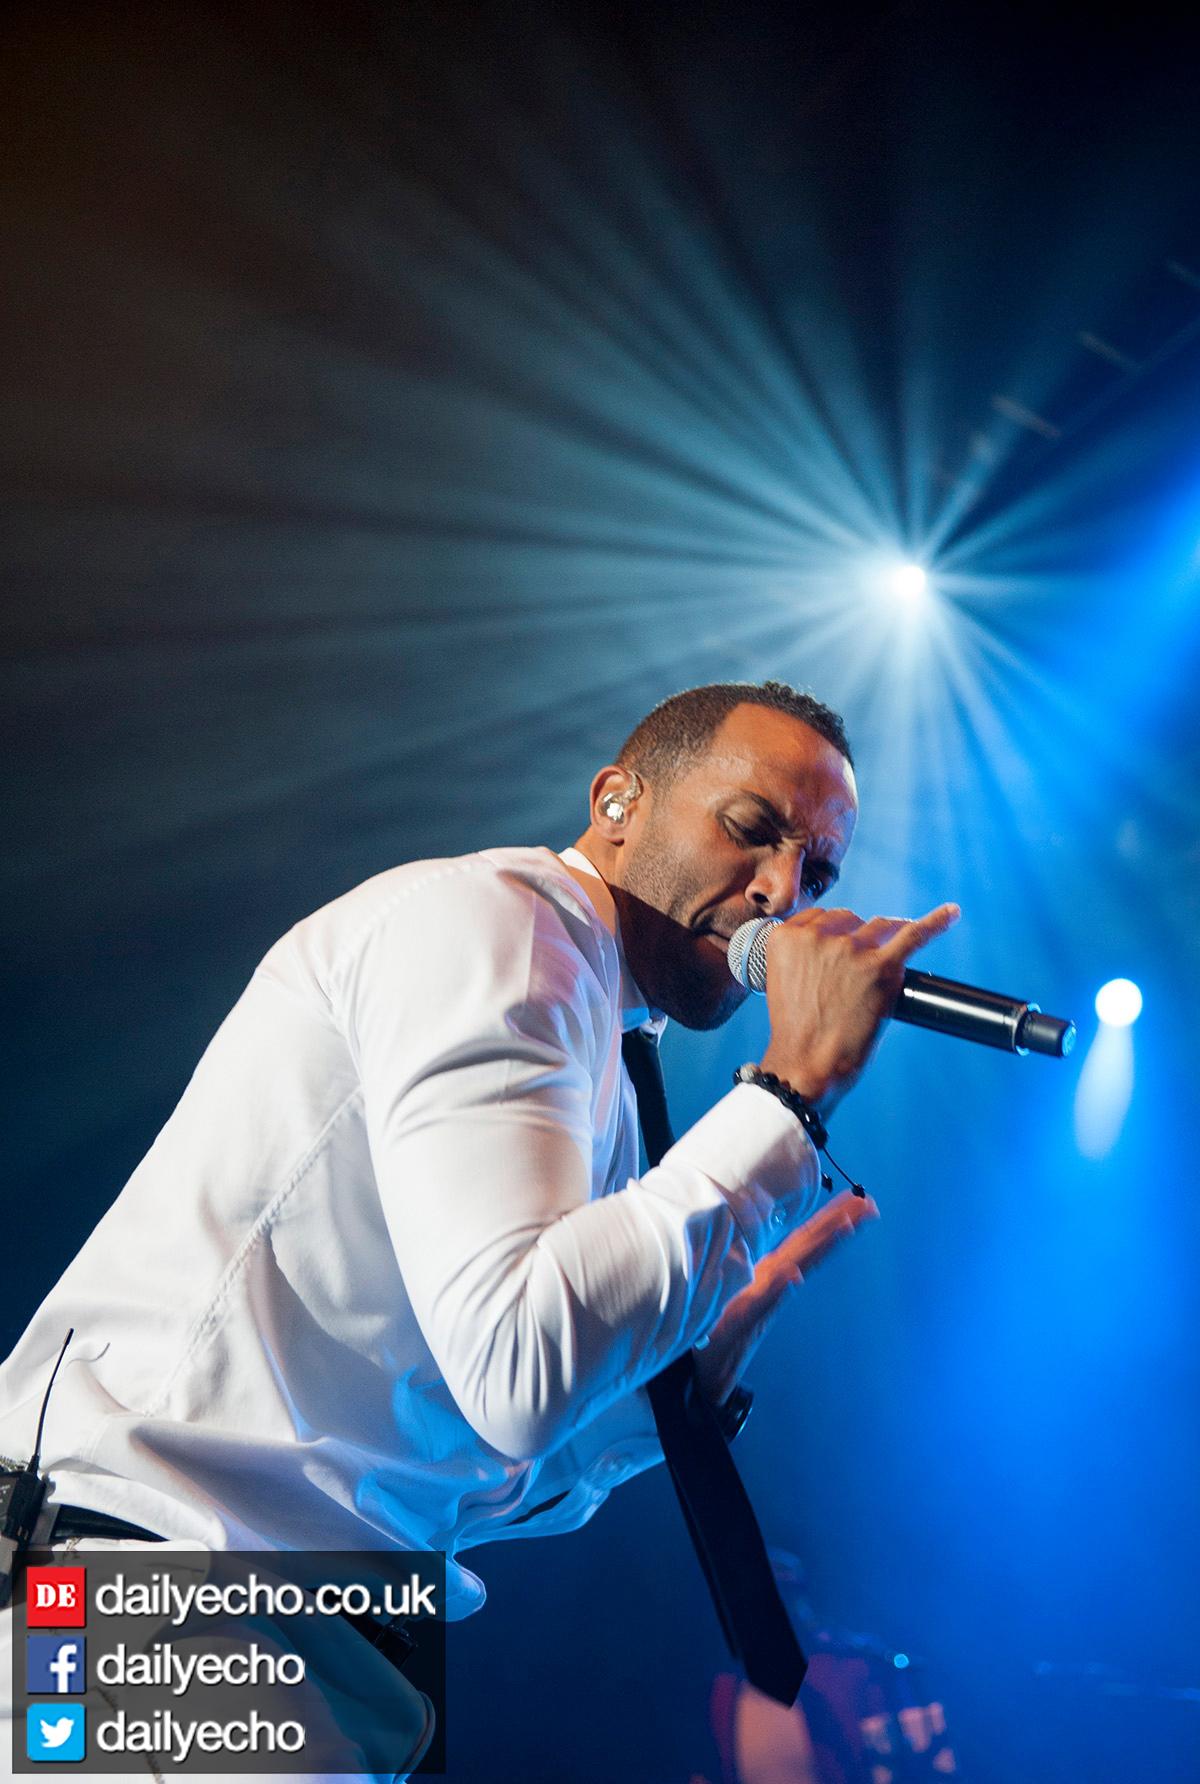 Craig David - picture by Mark Holloway